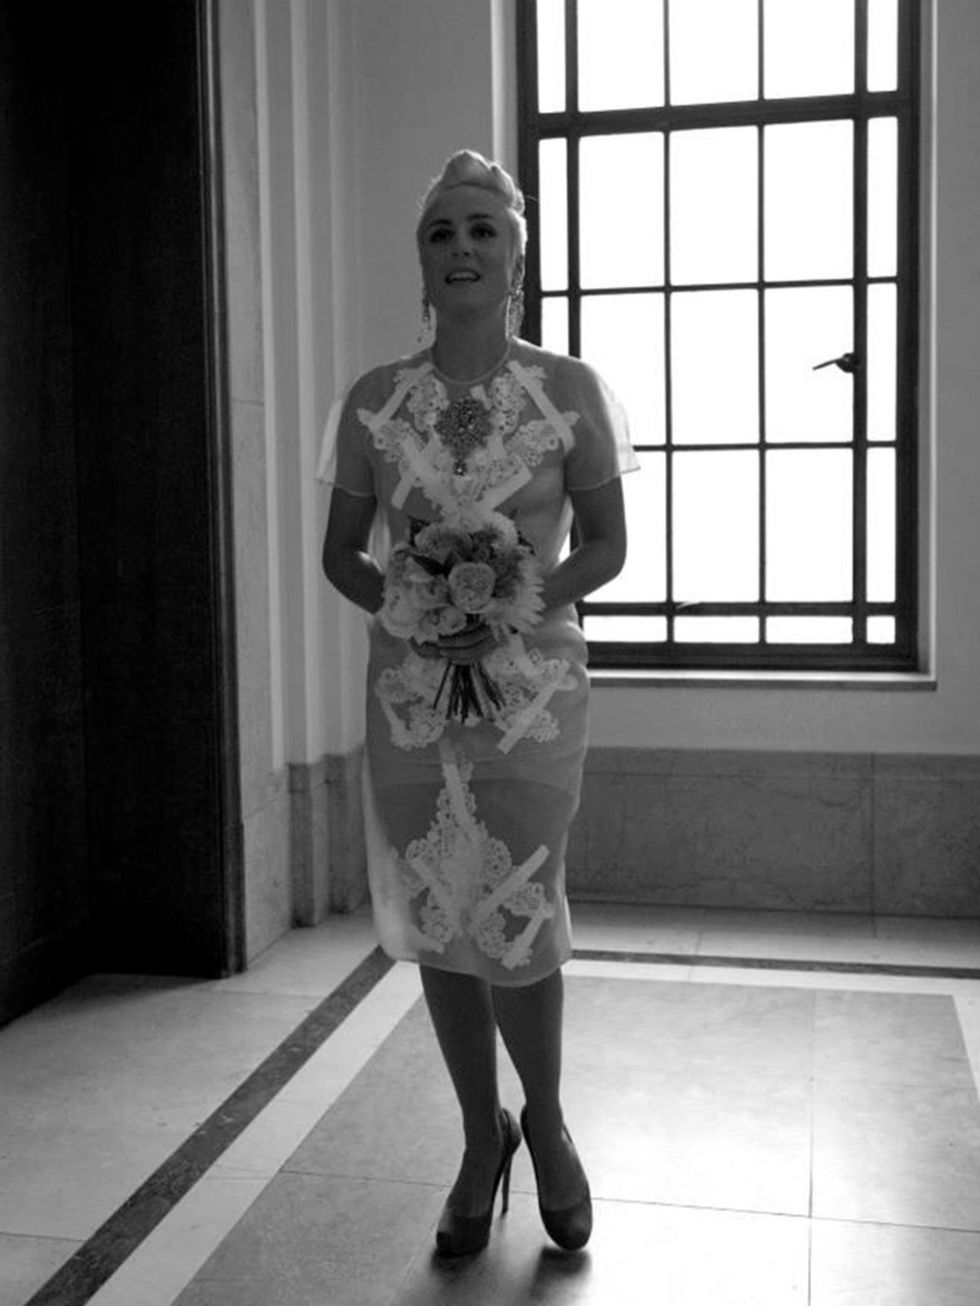 <p>My wedding dress was actually a two-piece skirt and top by Christopher Kane (SS13) in acid yellow with white lace applique, crystals and cellotape all over it. </p>

<p>The shoes were turquoise suede concealed platform pumps by Nicholas Kirkwood  a st